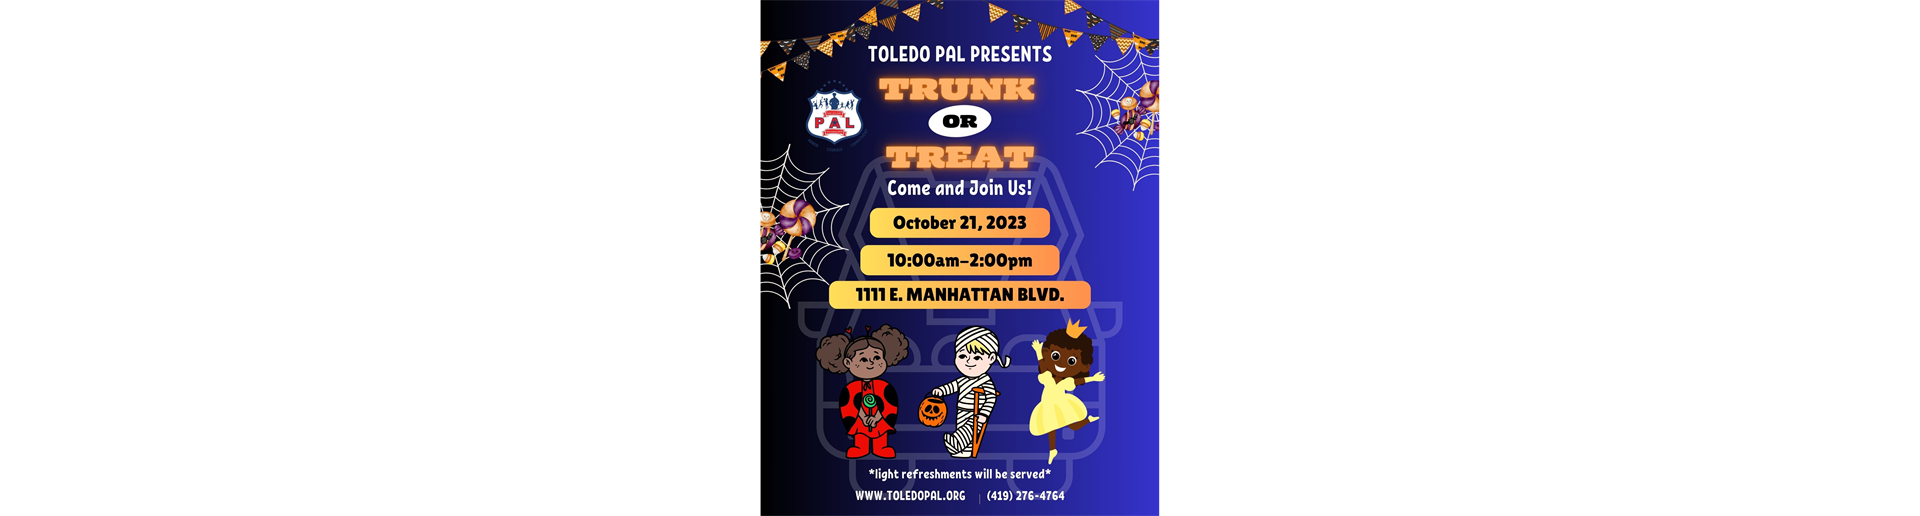 Toledo PAL Trunk or Treat Event Oct. 21st